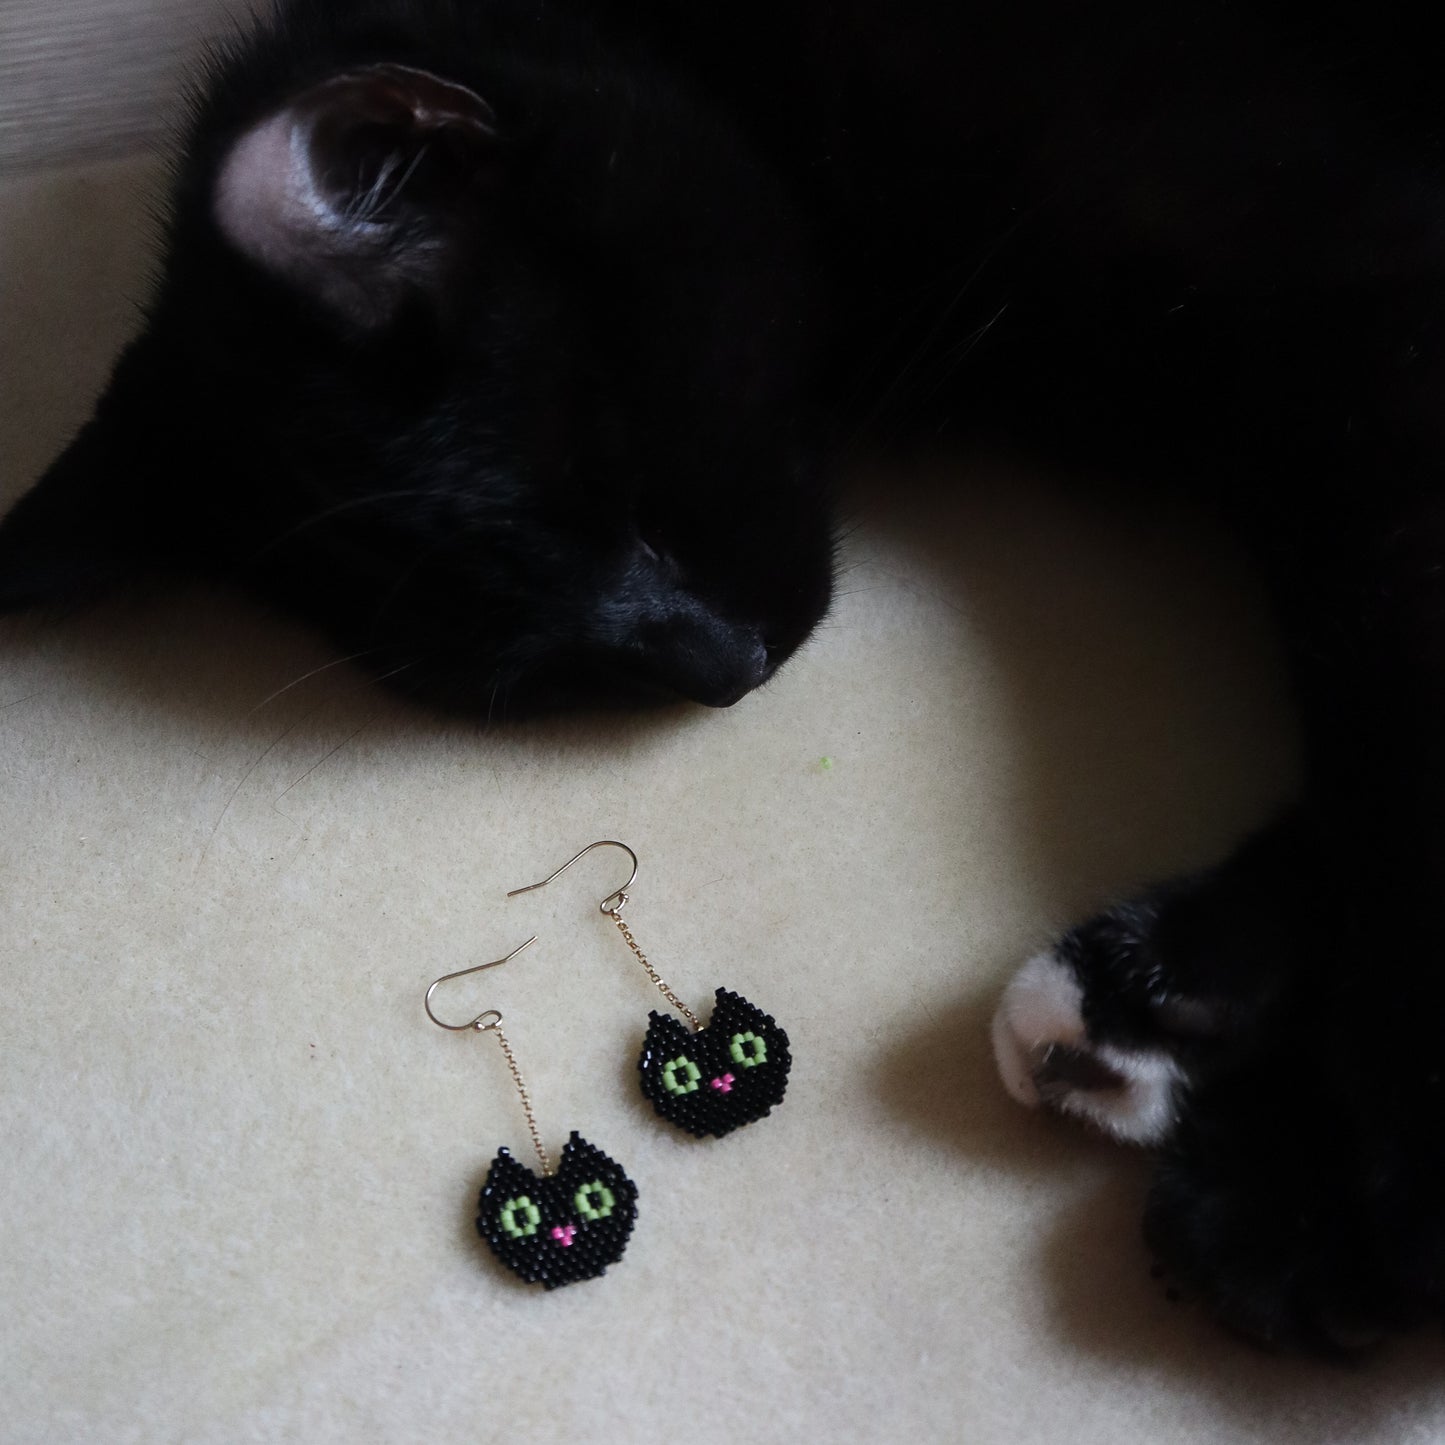 photo of a black cat next to beaded black cat earrings